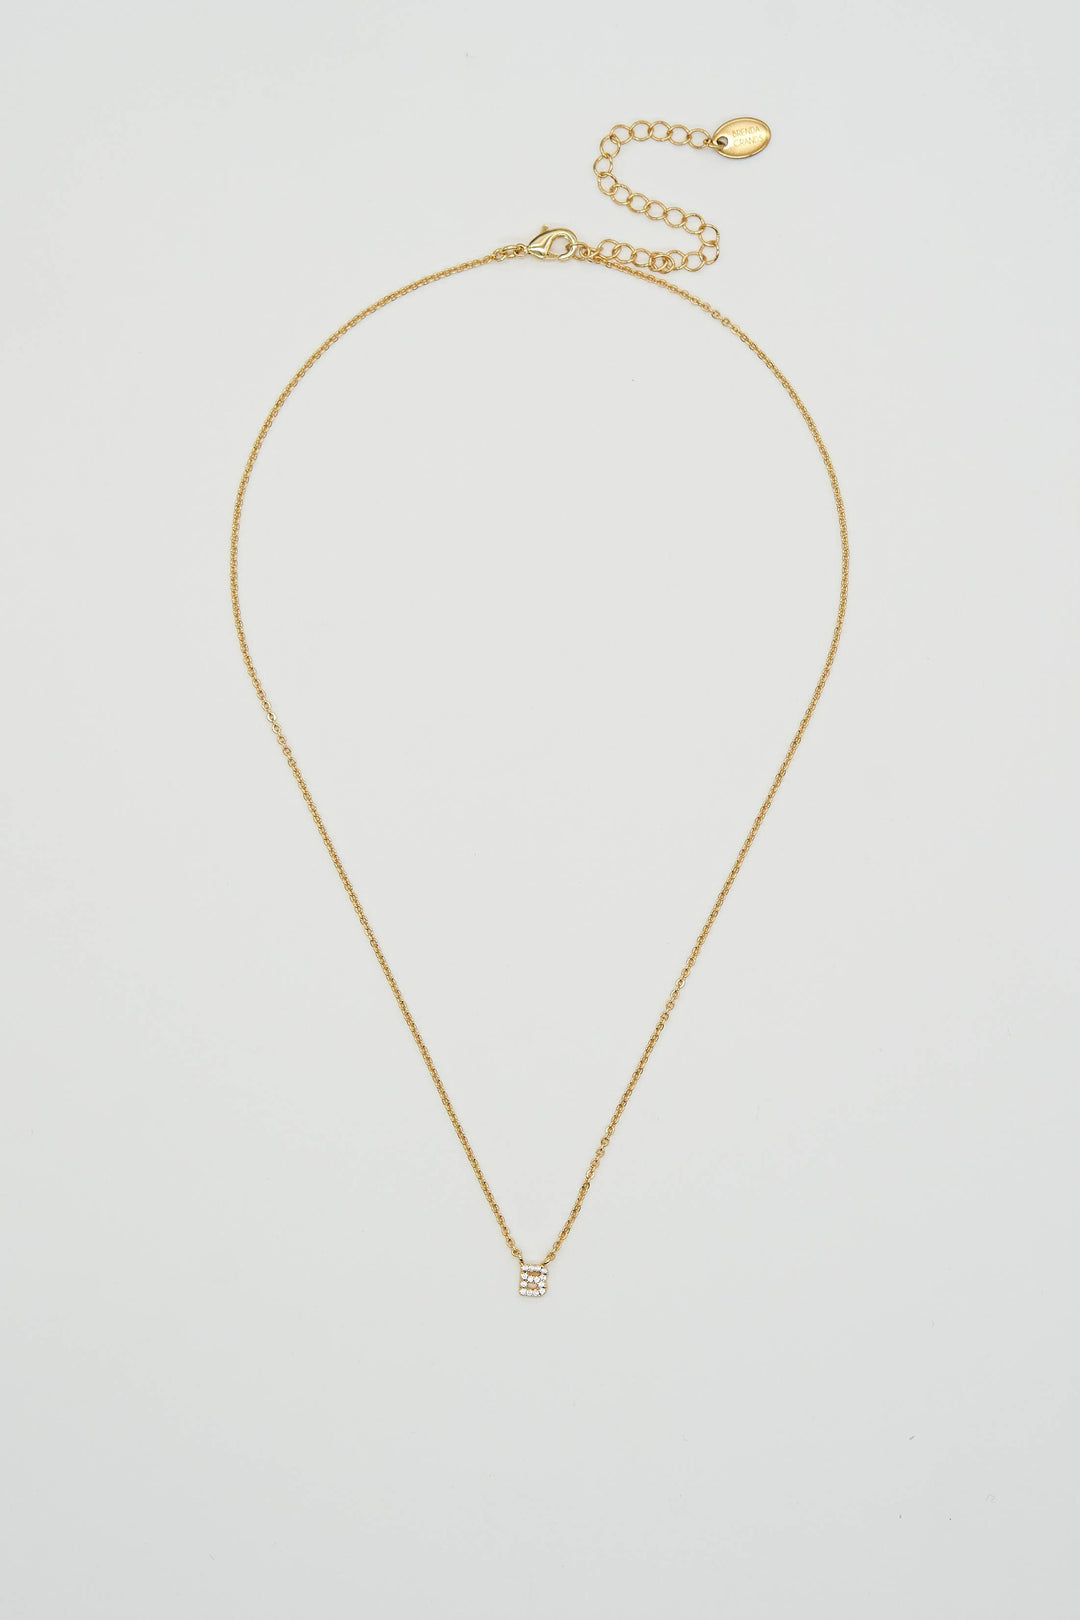 Shiny Initial Necklace: Holiday Favorite!: J